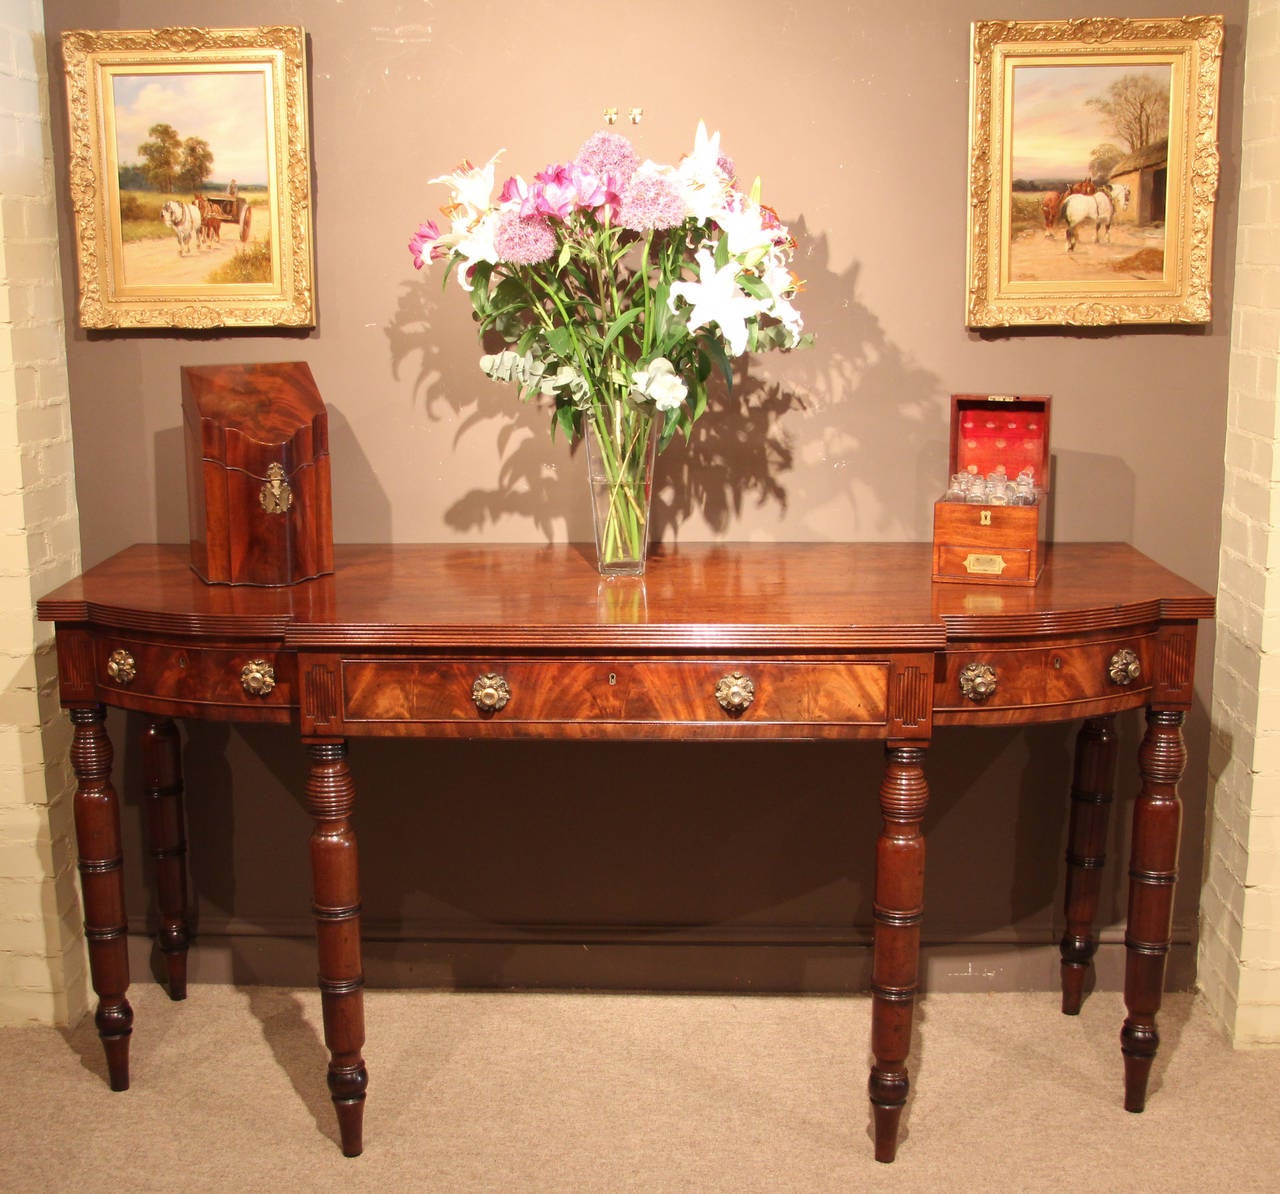 A superb Regency period breakfast serving table/sideboard in mahogany with original gilt brass handles and ebonised details. Certain features would indicate Jersey origin, circa 1820. 

All of the items that we advertise for sale have been as